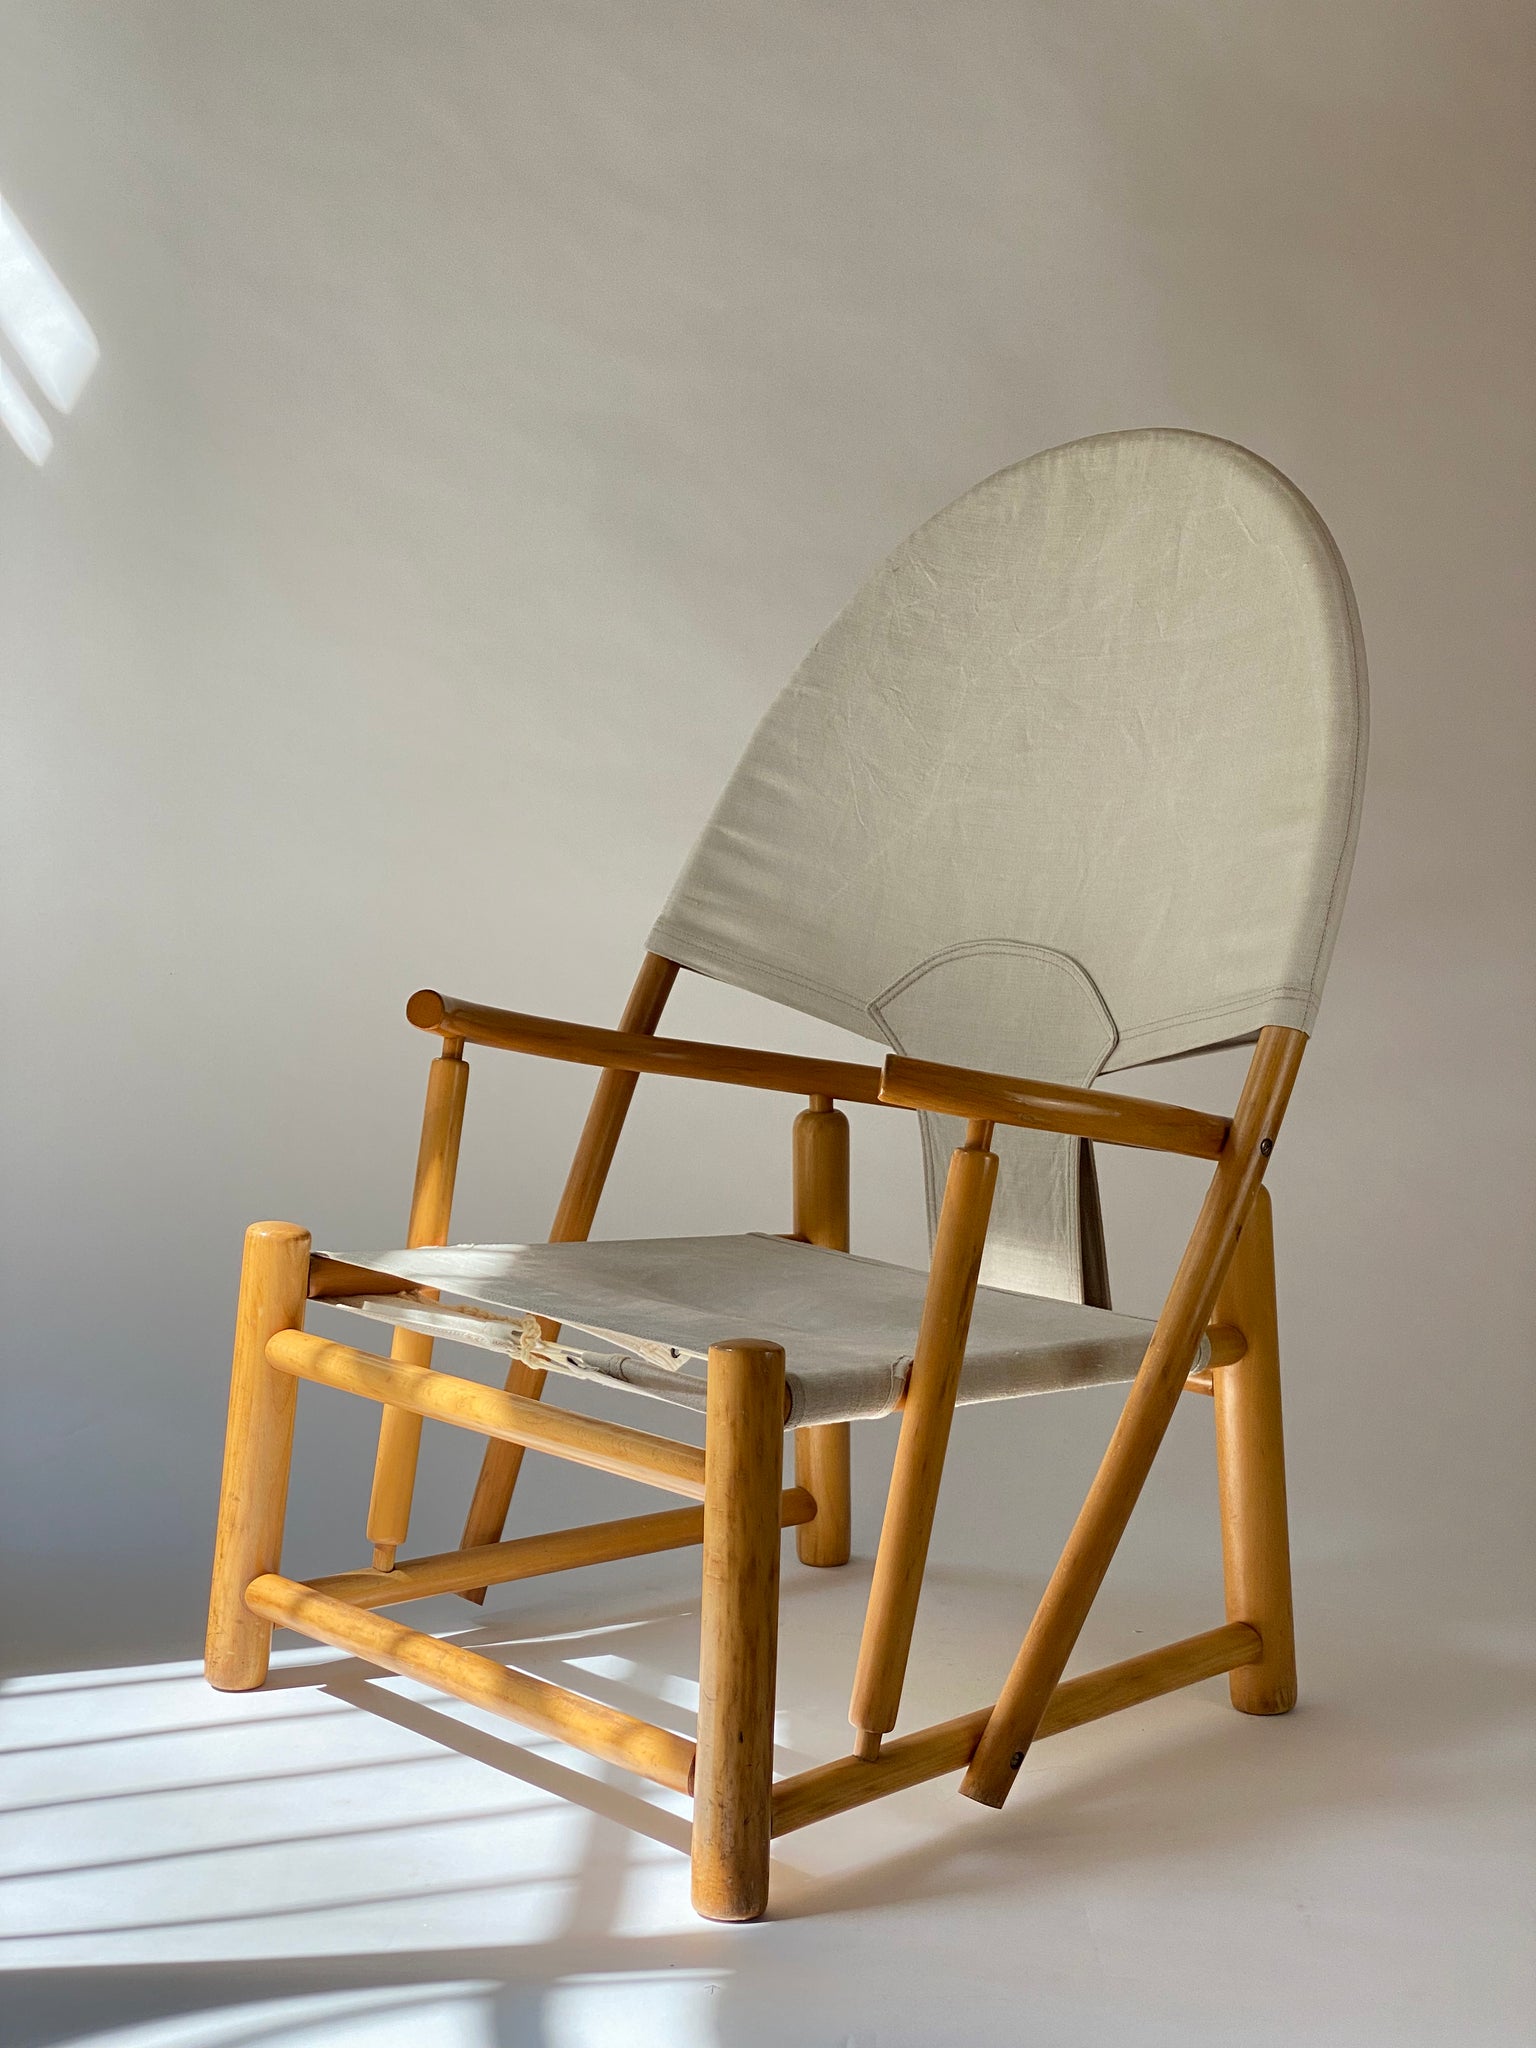 G23 Hoop Lounge Chair by Piero Palange & Werther Toffoloni for Germa, –  ANOTHER JUNE